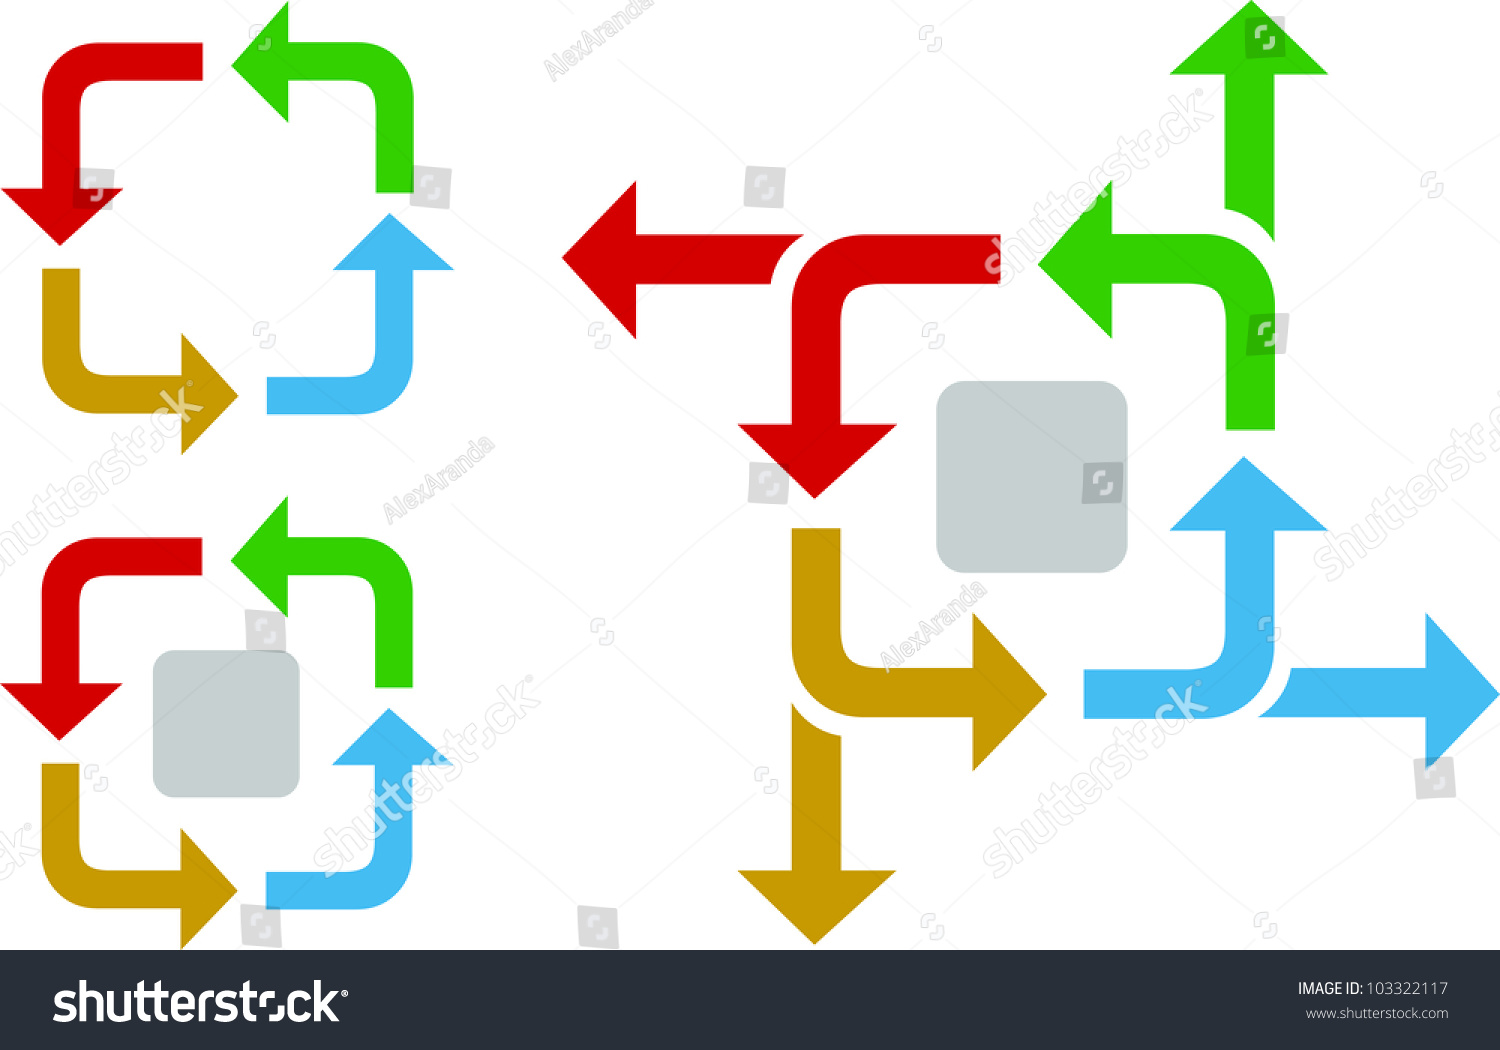 clipart for business process - photo #18